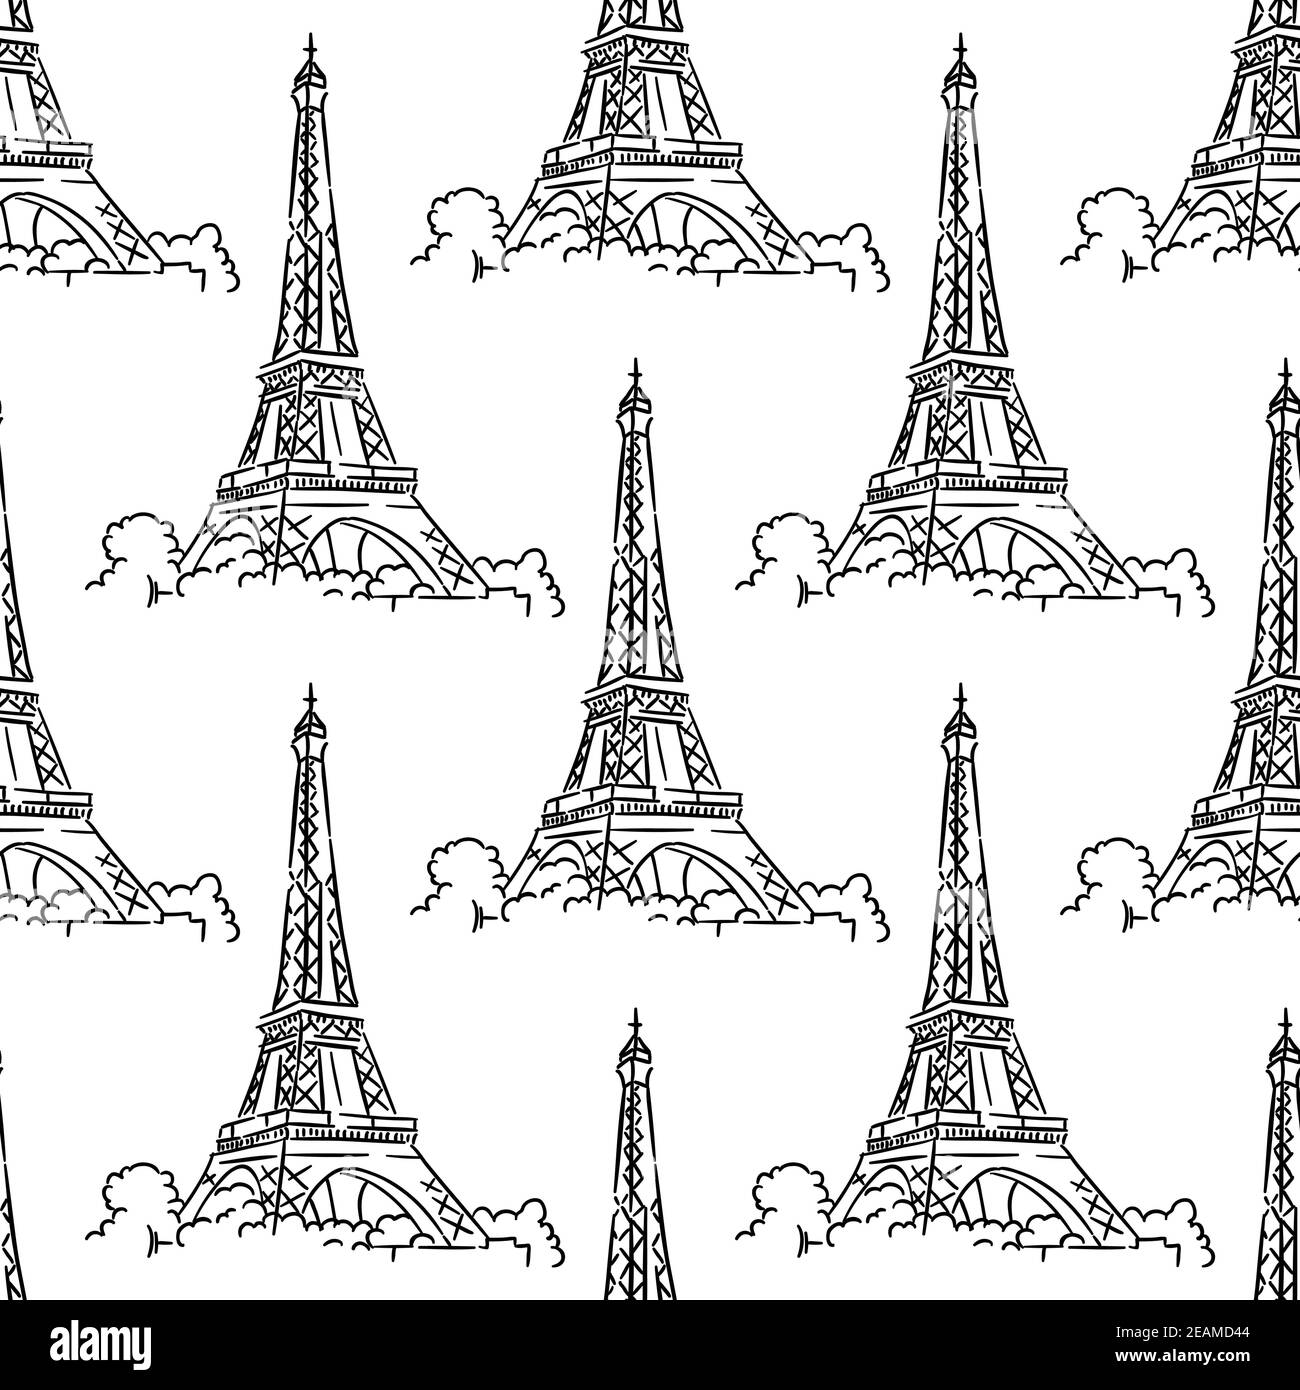 Eiffel Tower seamless background pattern with a black and white delicate outline illustration in a repeat motif in square format Stock Vector